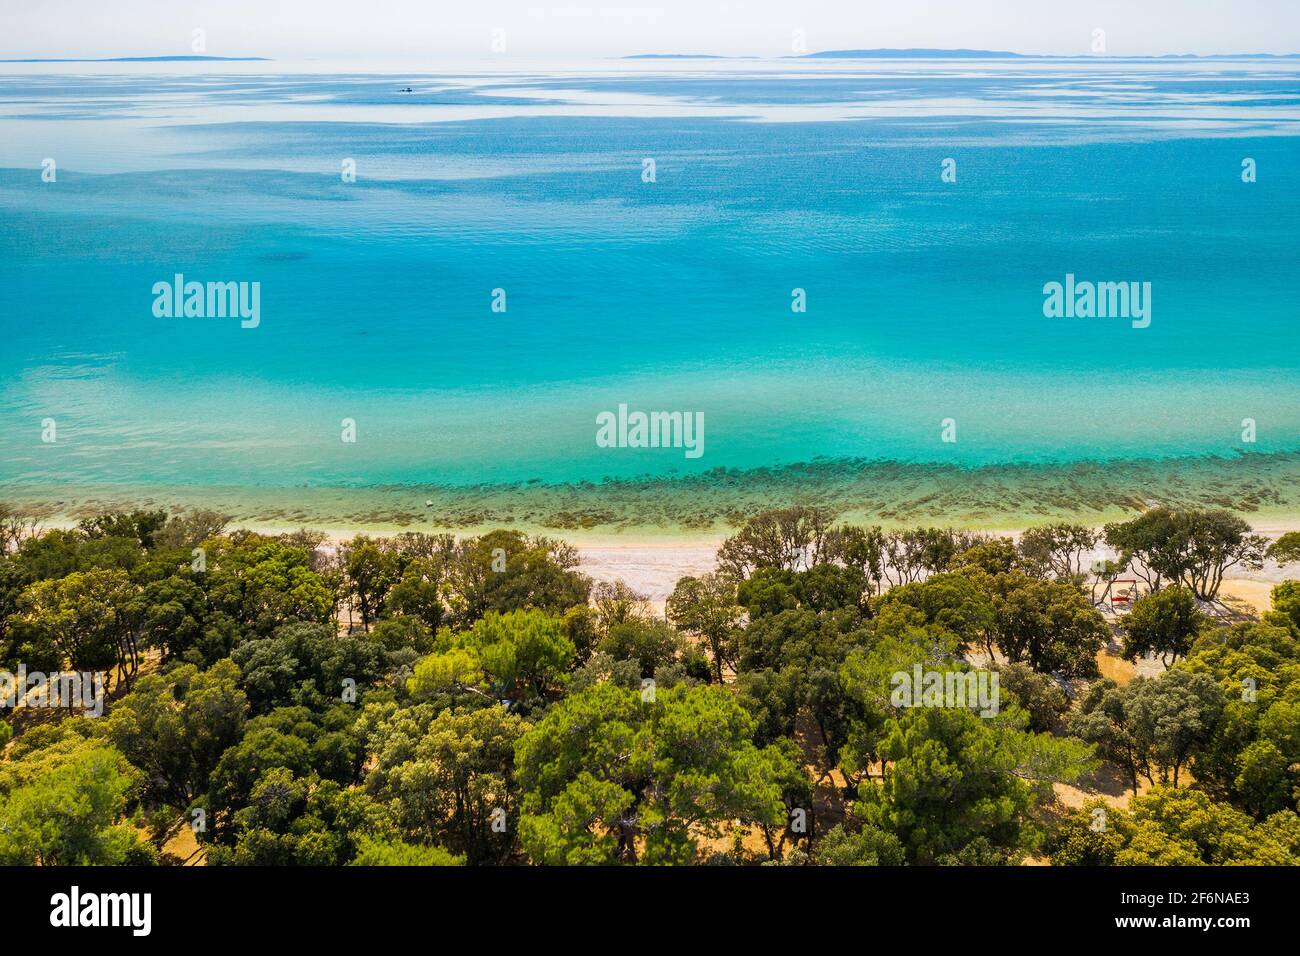 Beautiful island of Pag in Croatia, long beaches under pine trees and Adriatic Sea in background, drone aerial view Stock Photo